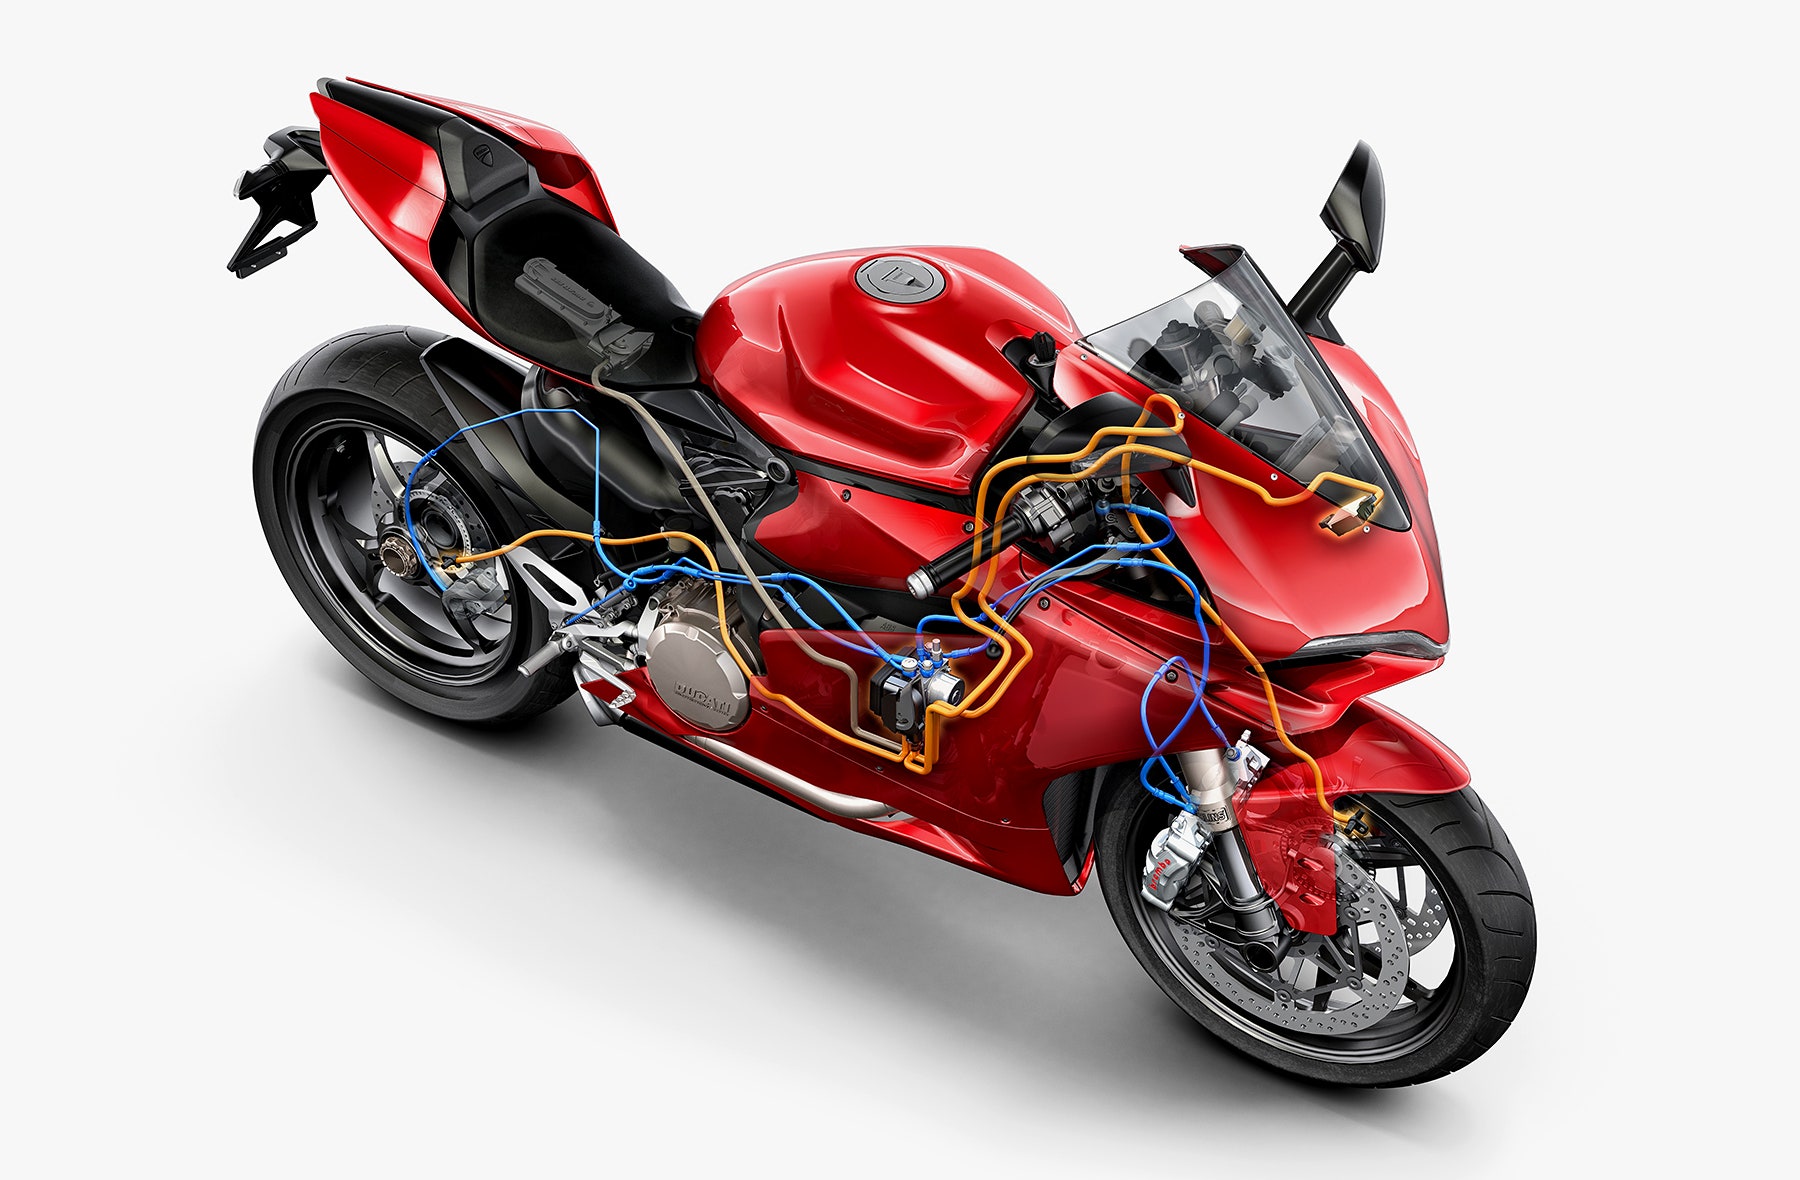 How Does The Ducati Riding Modes System Work?